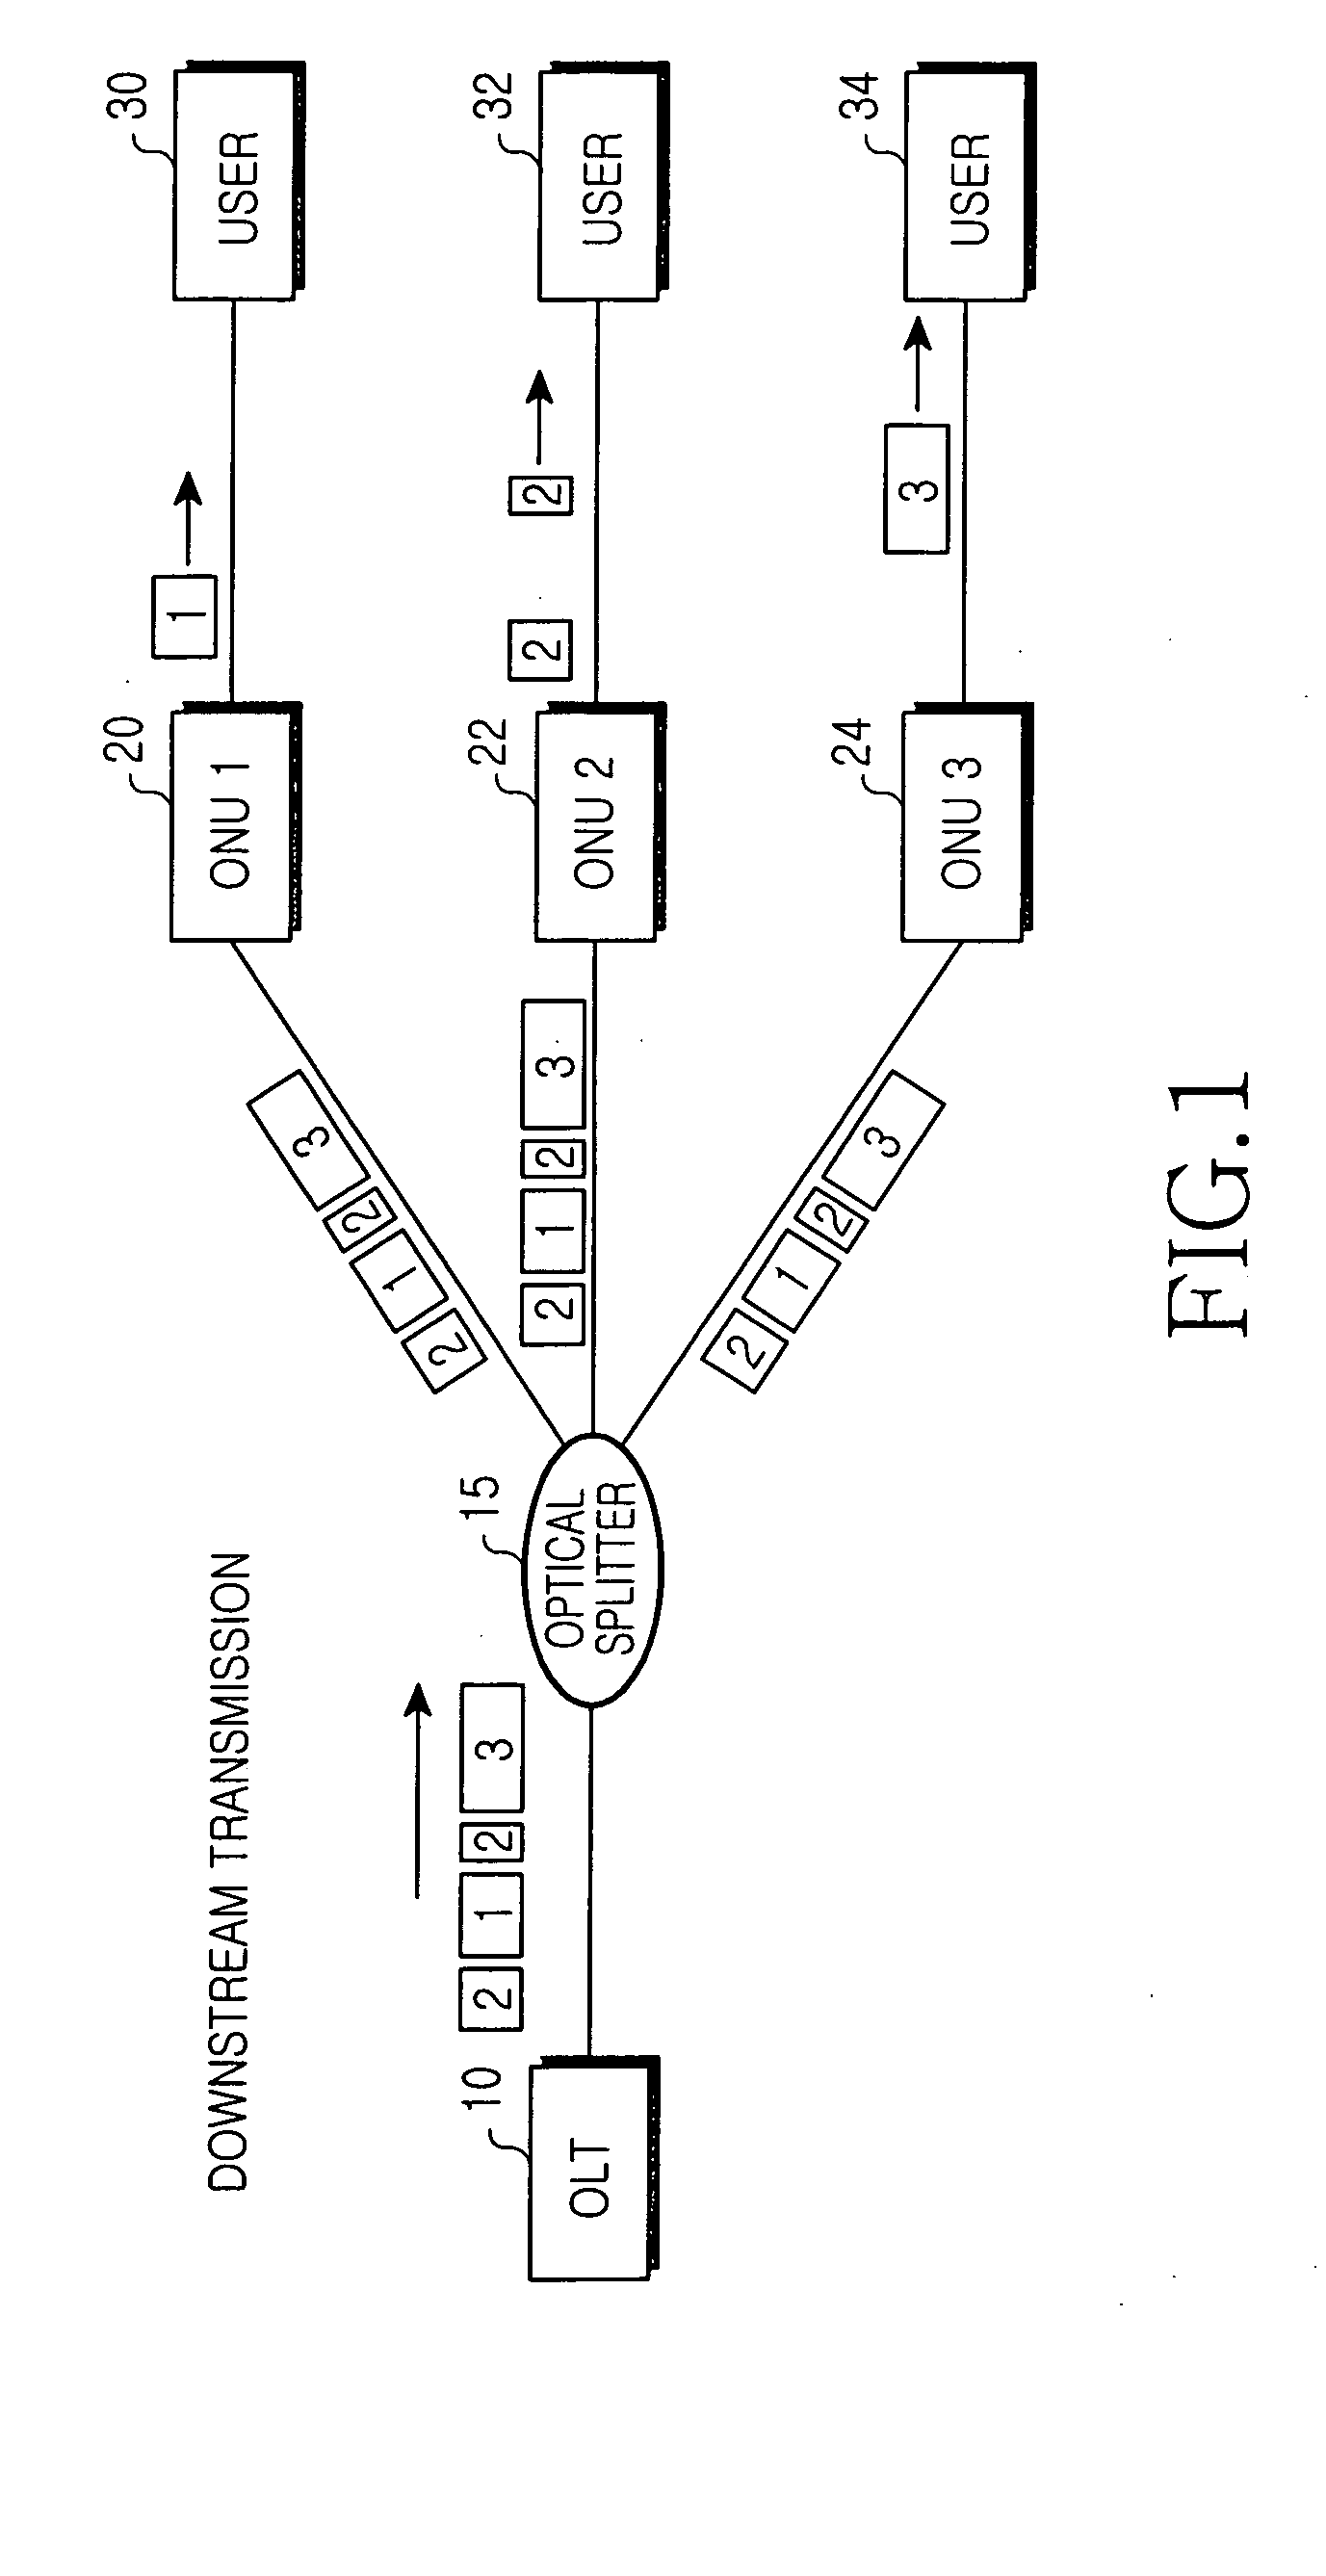 Optical line terminal for managing link status of optical network units and gigabit ethernet passive optical network employing same